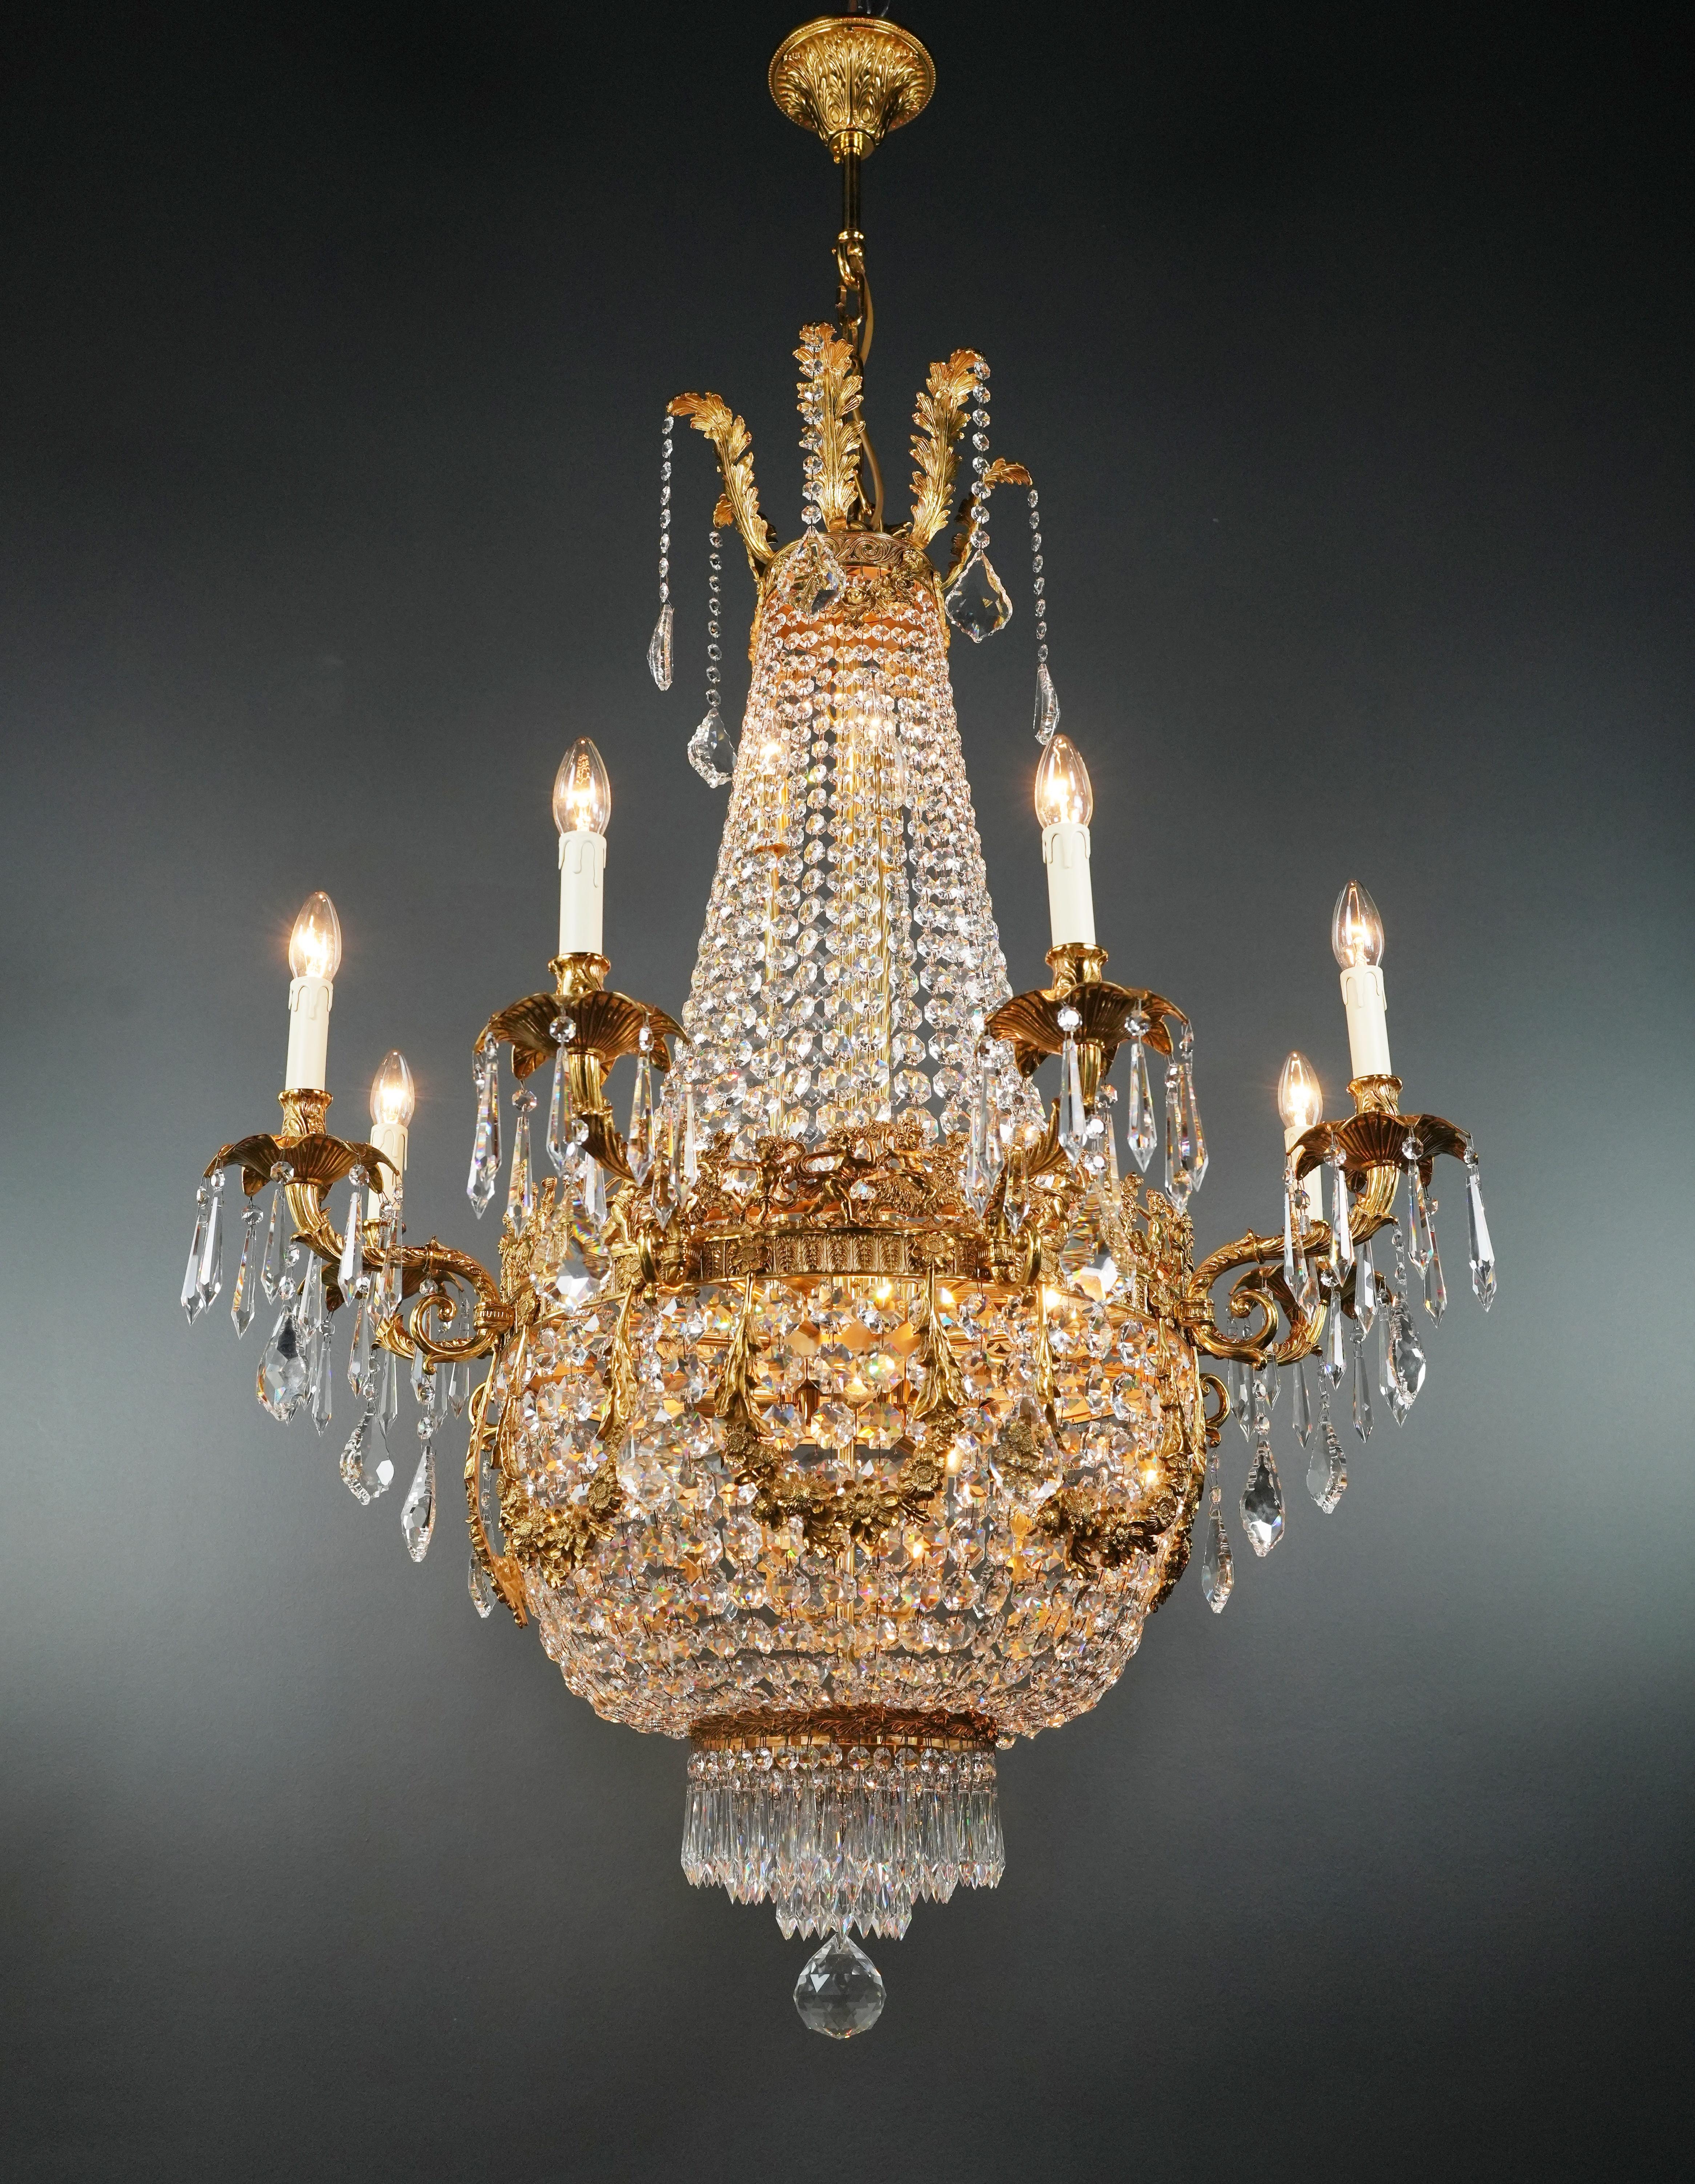 Empire Revival Putto Wreat Brass Basket Empire Sac a Pearl Chandelier Crystal and Antique Gold For Sale